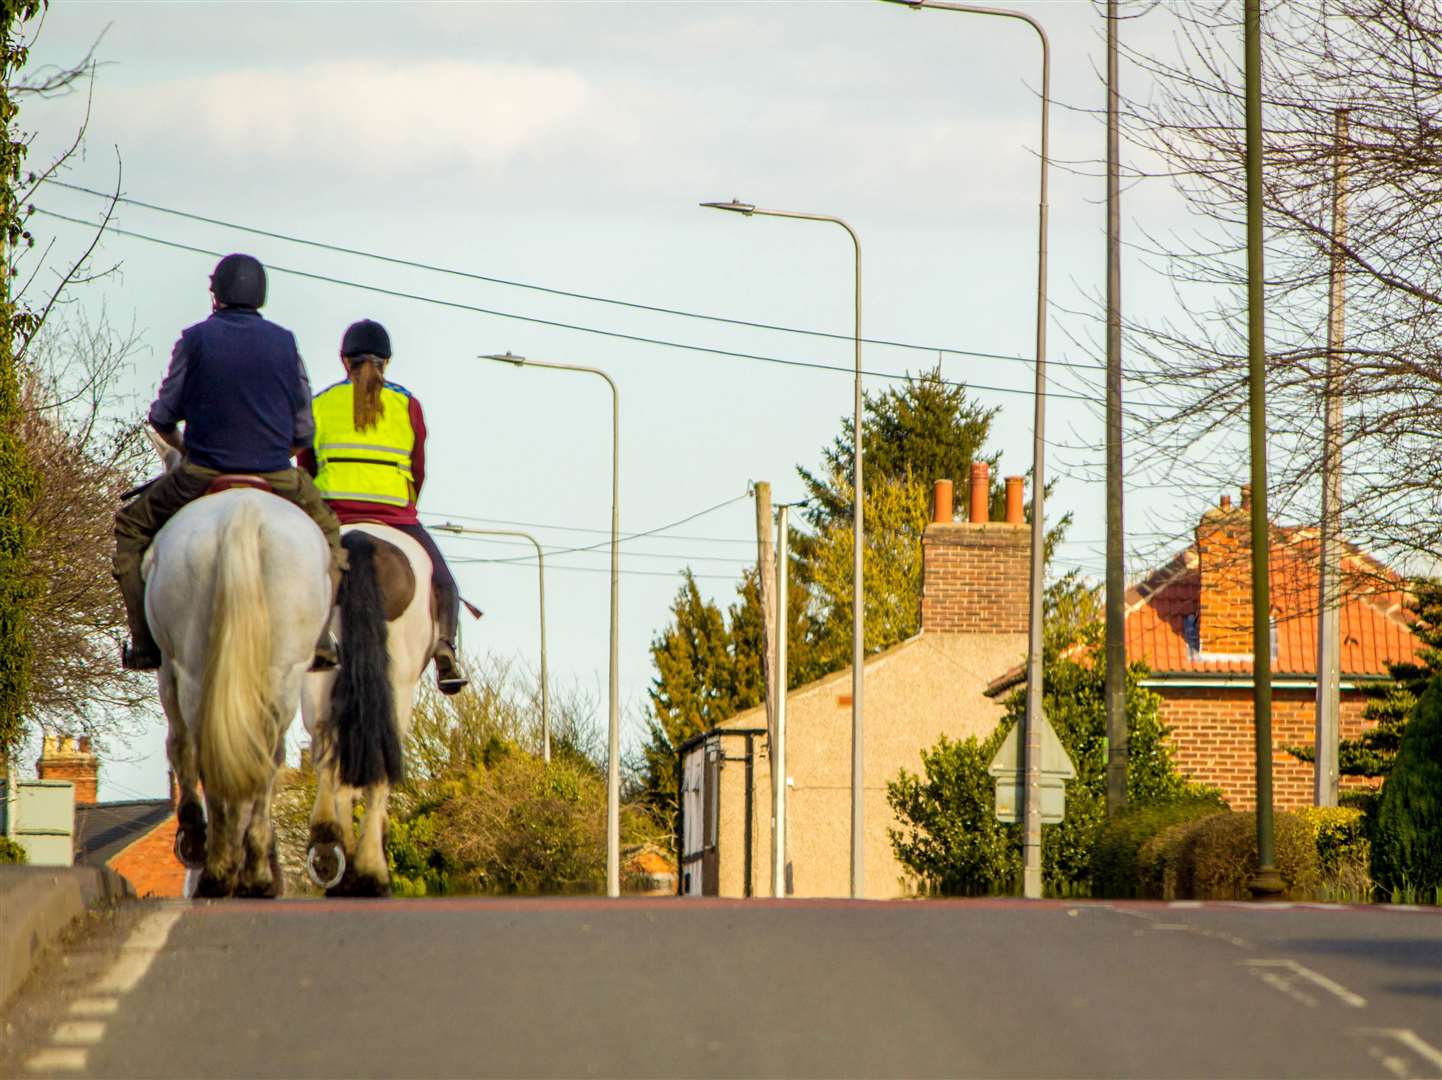 A bridleway would help keep riders safe